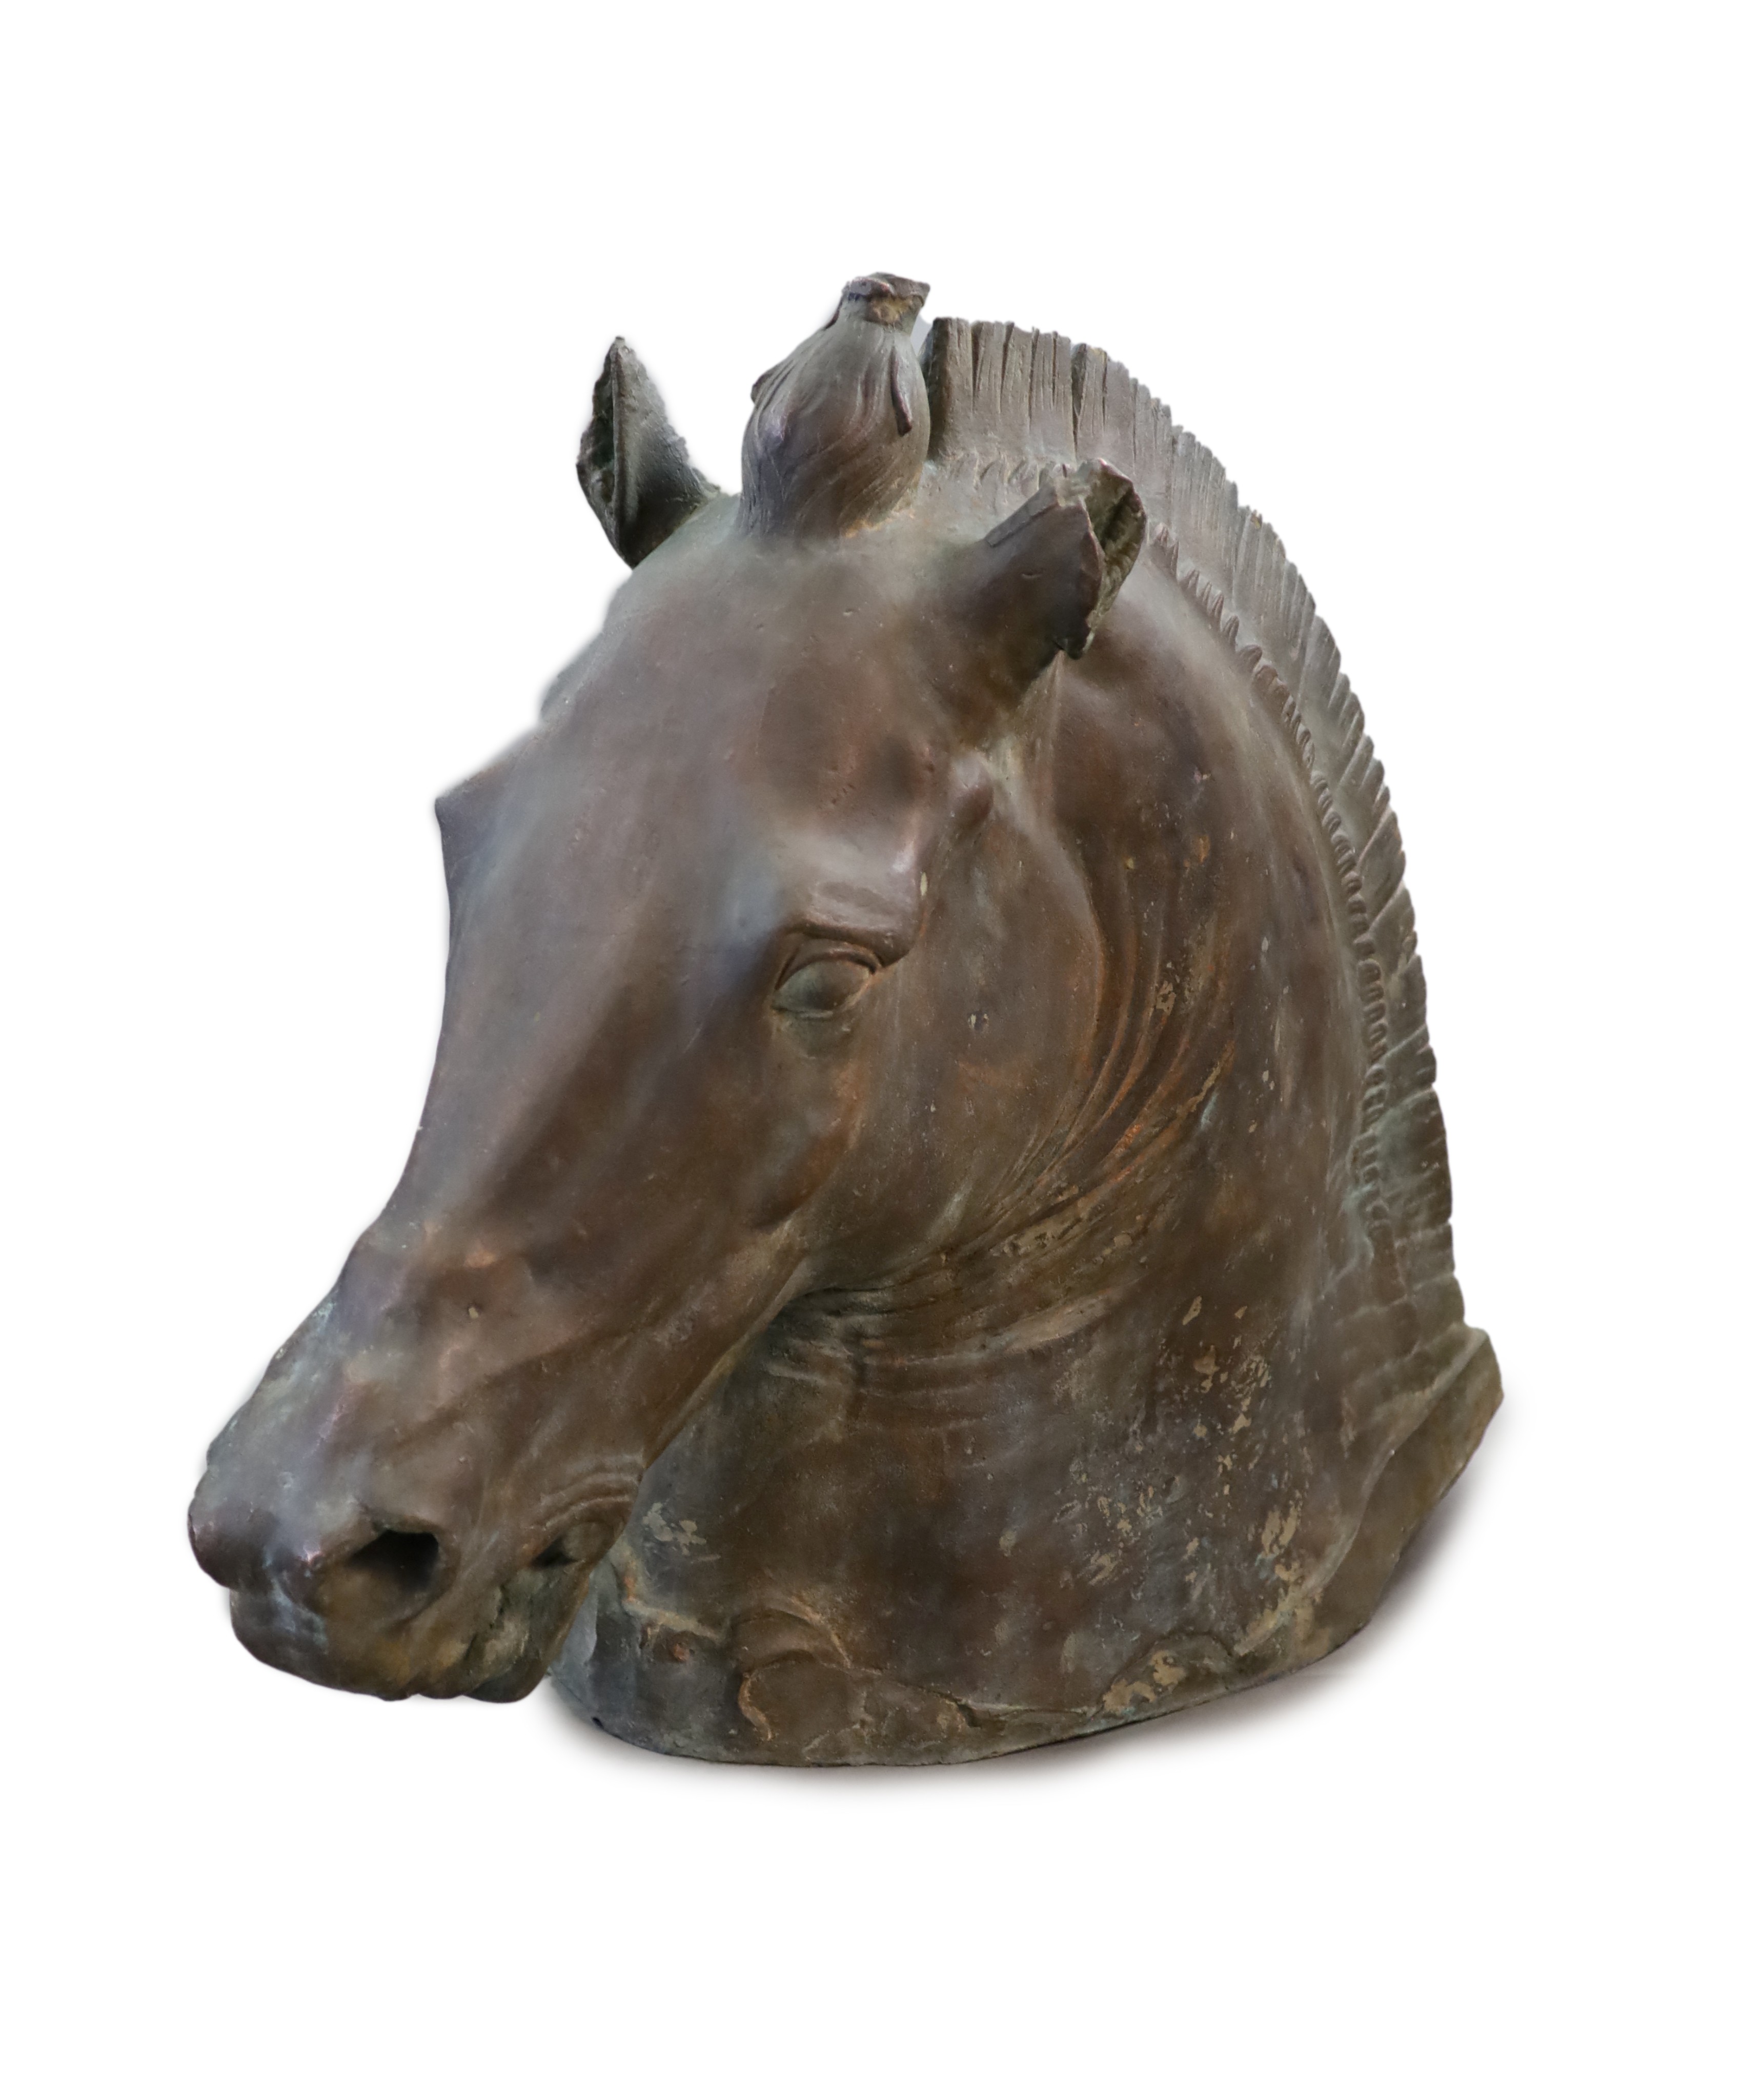 A large and impressive full-size bronze model after the Medici Riccardi horse’s head, 20th century, H 80cm. L 97cm.